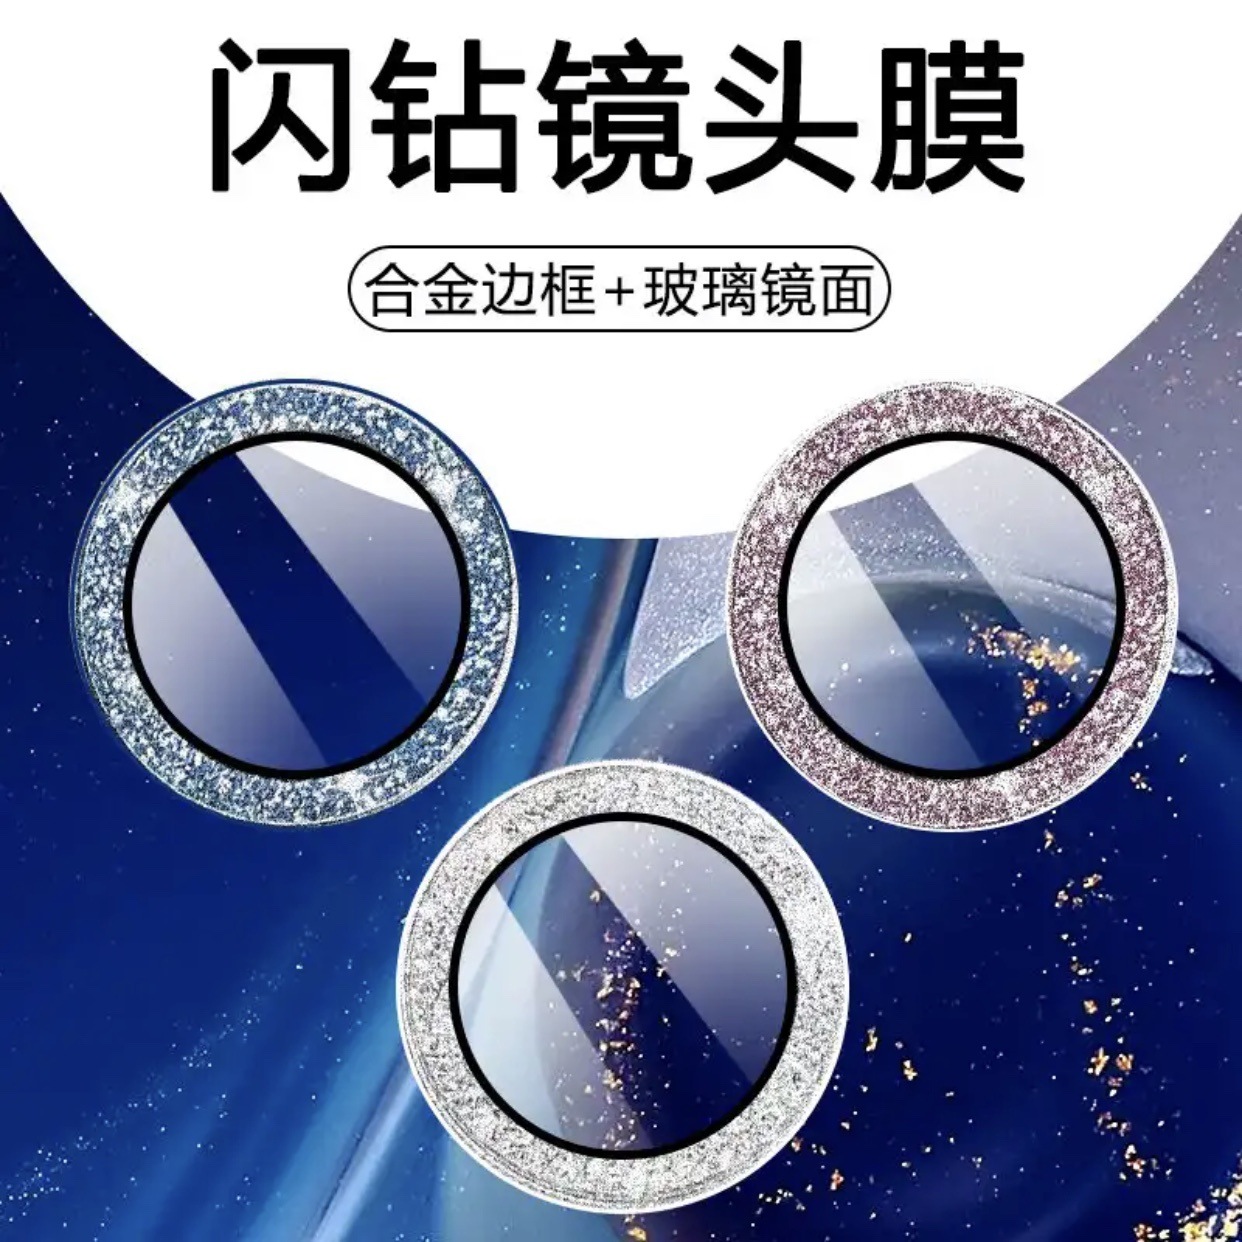 Suitable for apple 13 metal ring lens st...